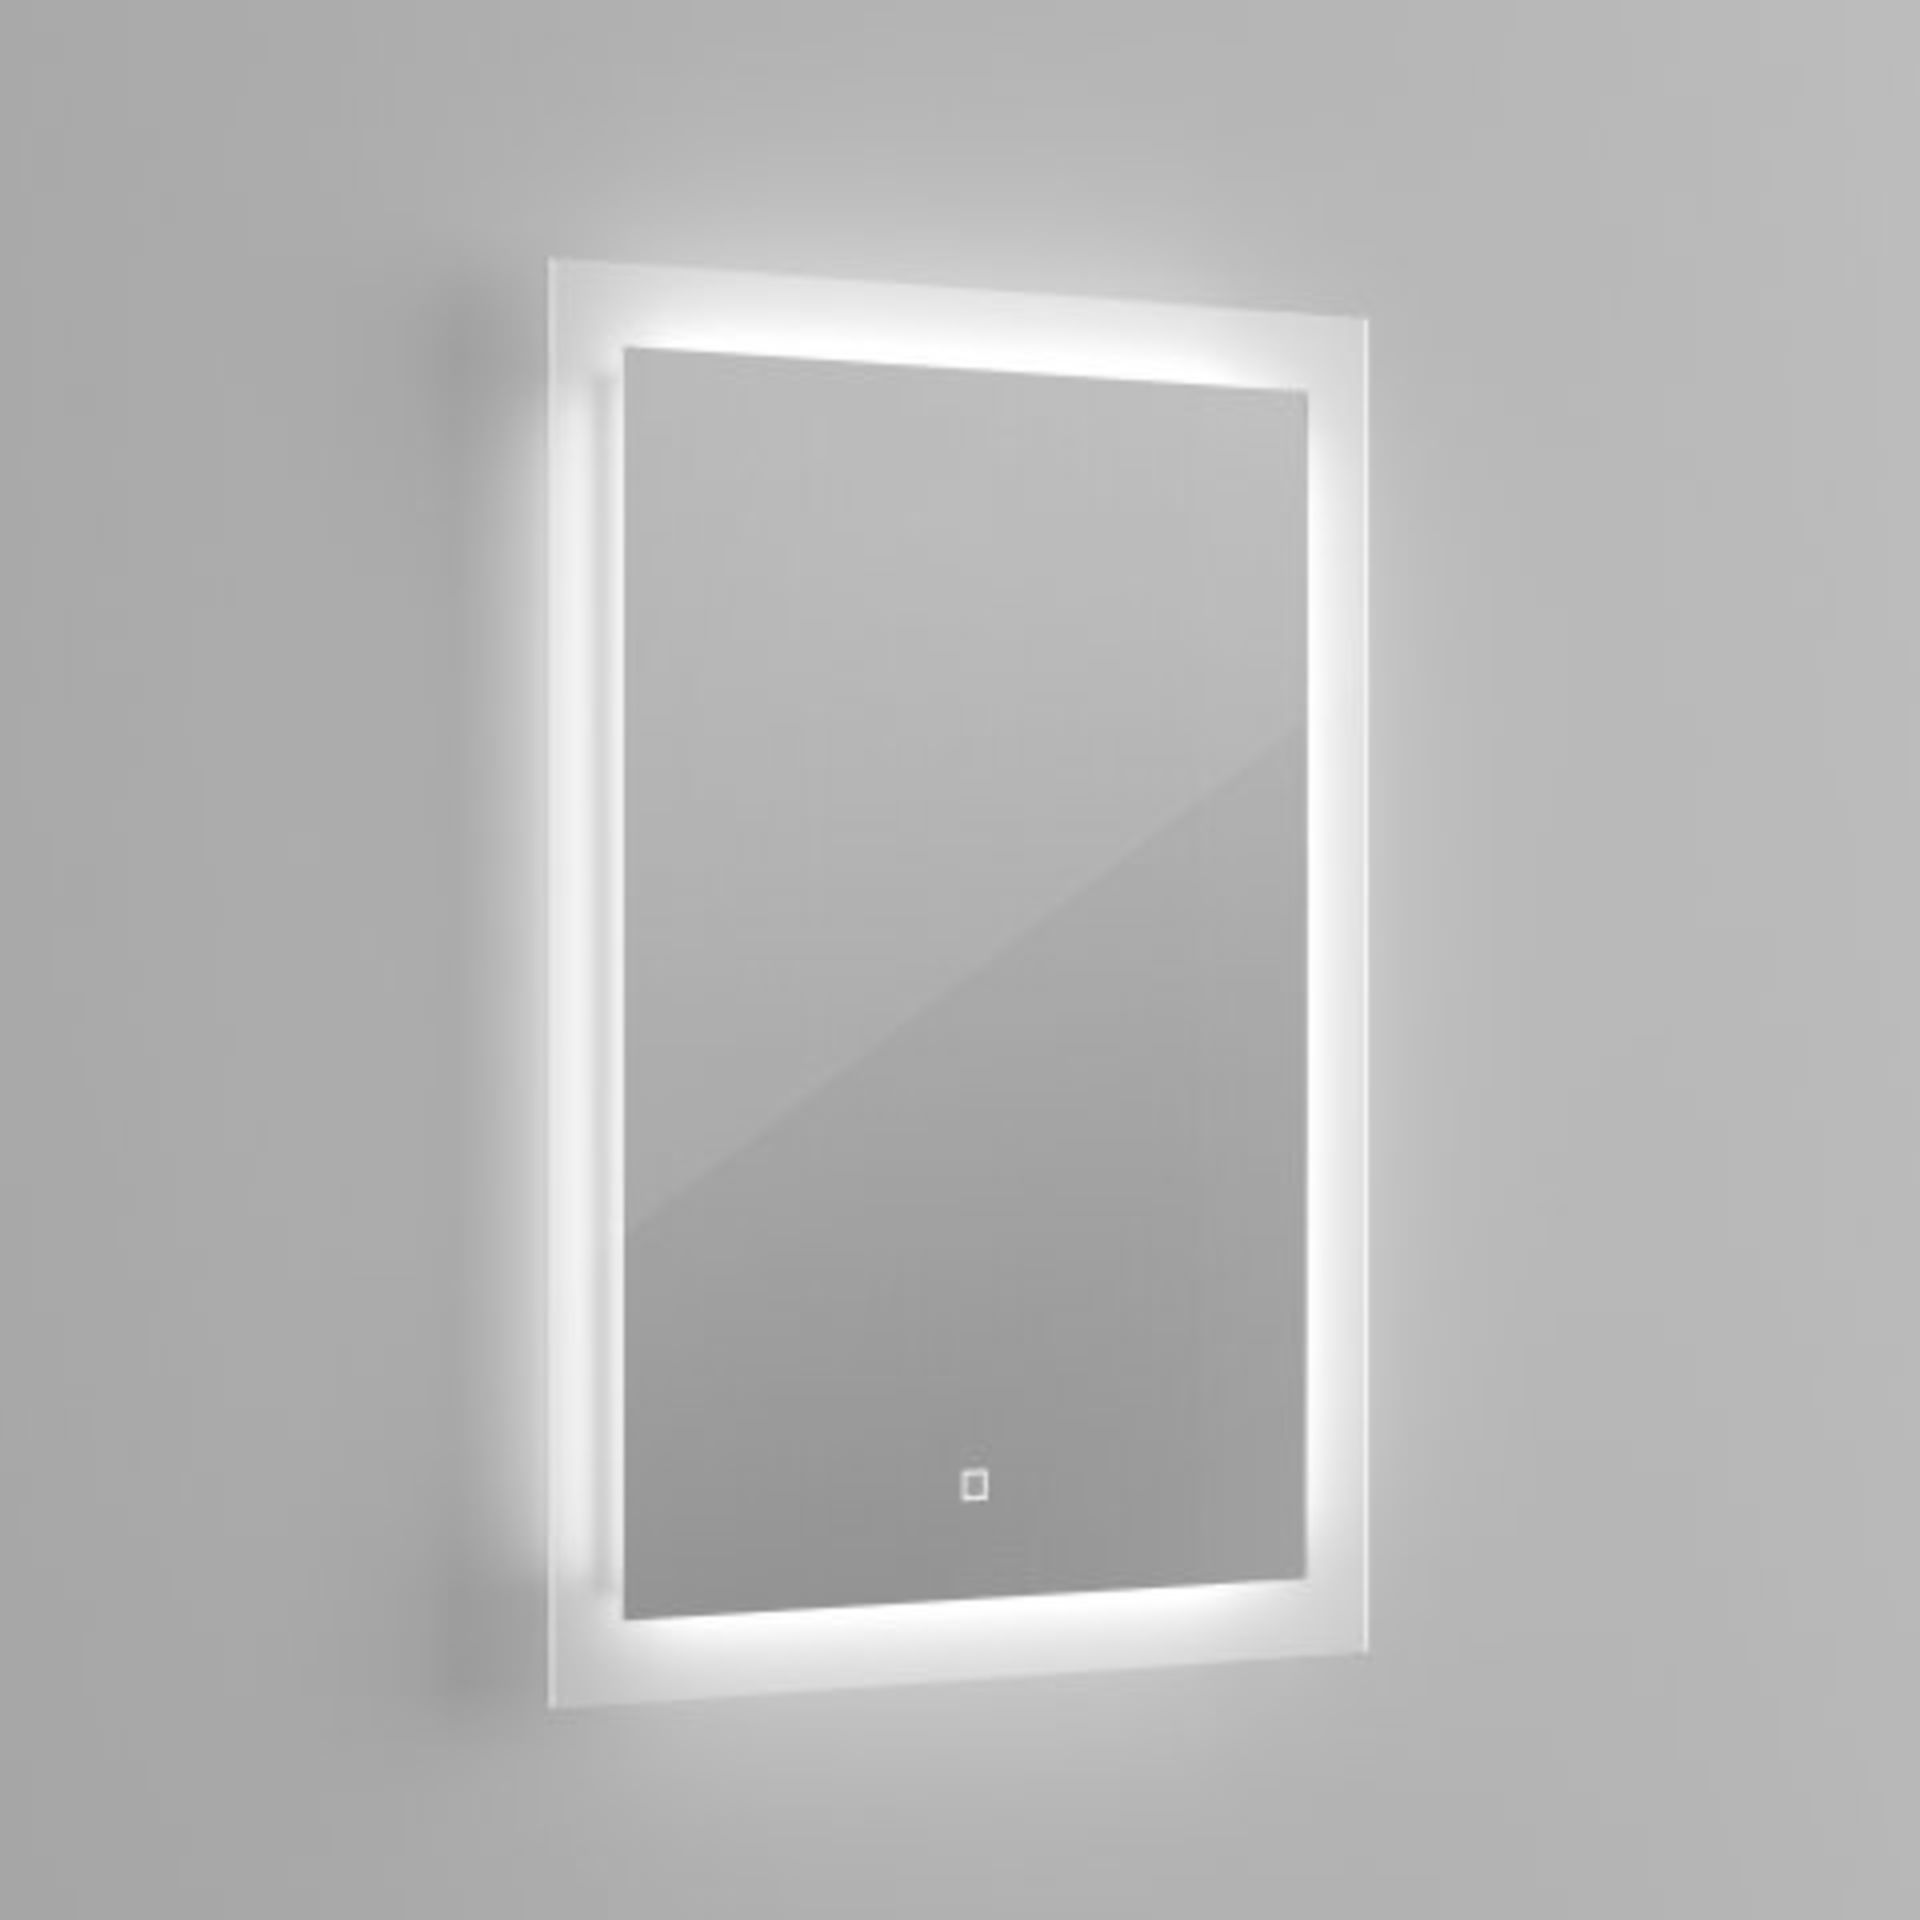 (52) 700x500mm Orion Illuminated LED Mirror - Switch Control. RRP £349.99. Light up your bathroom - Image 2 of 3